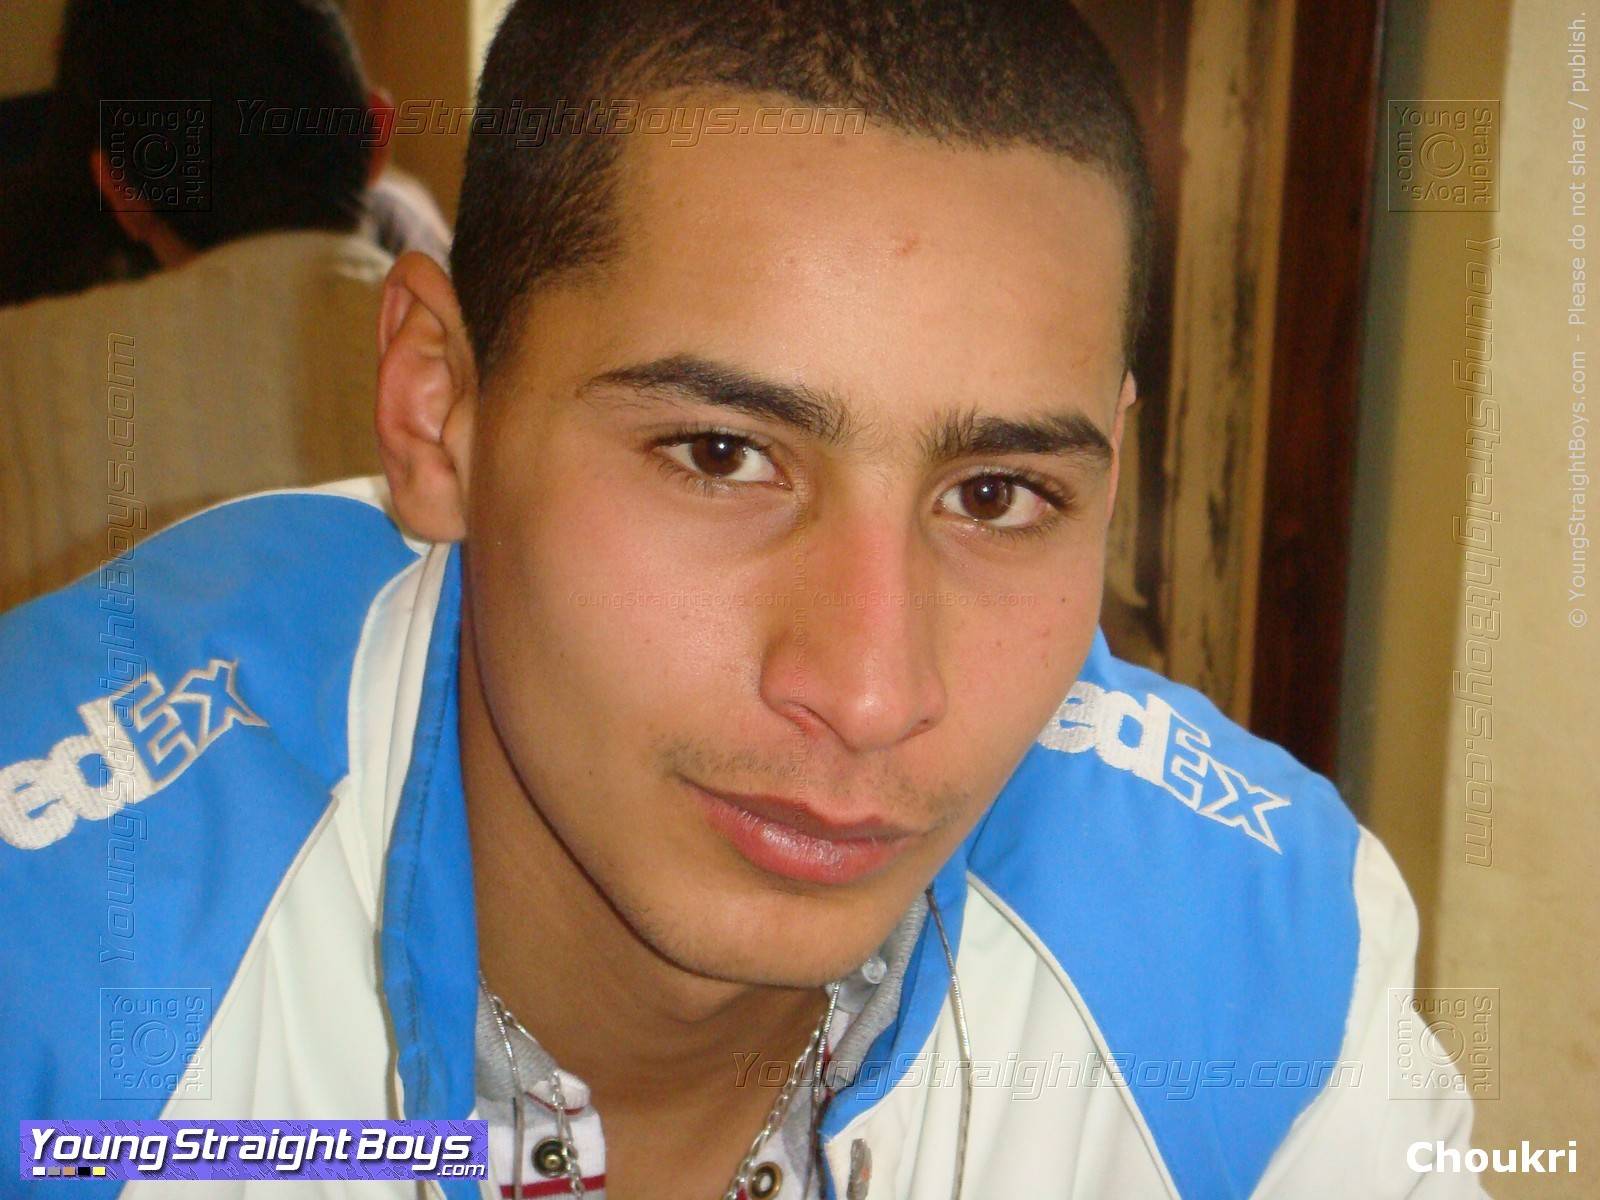 Face picture of very handsome young Arab straight twink in a café, smiling (cute face and eyes and mouth)